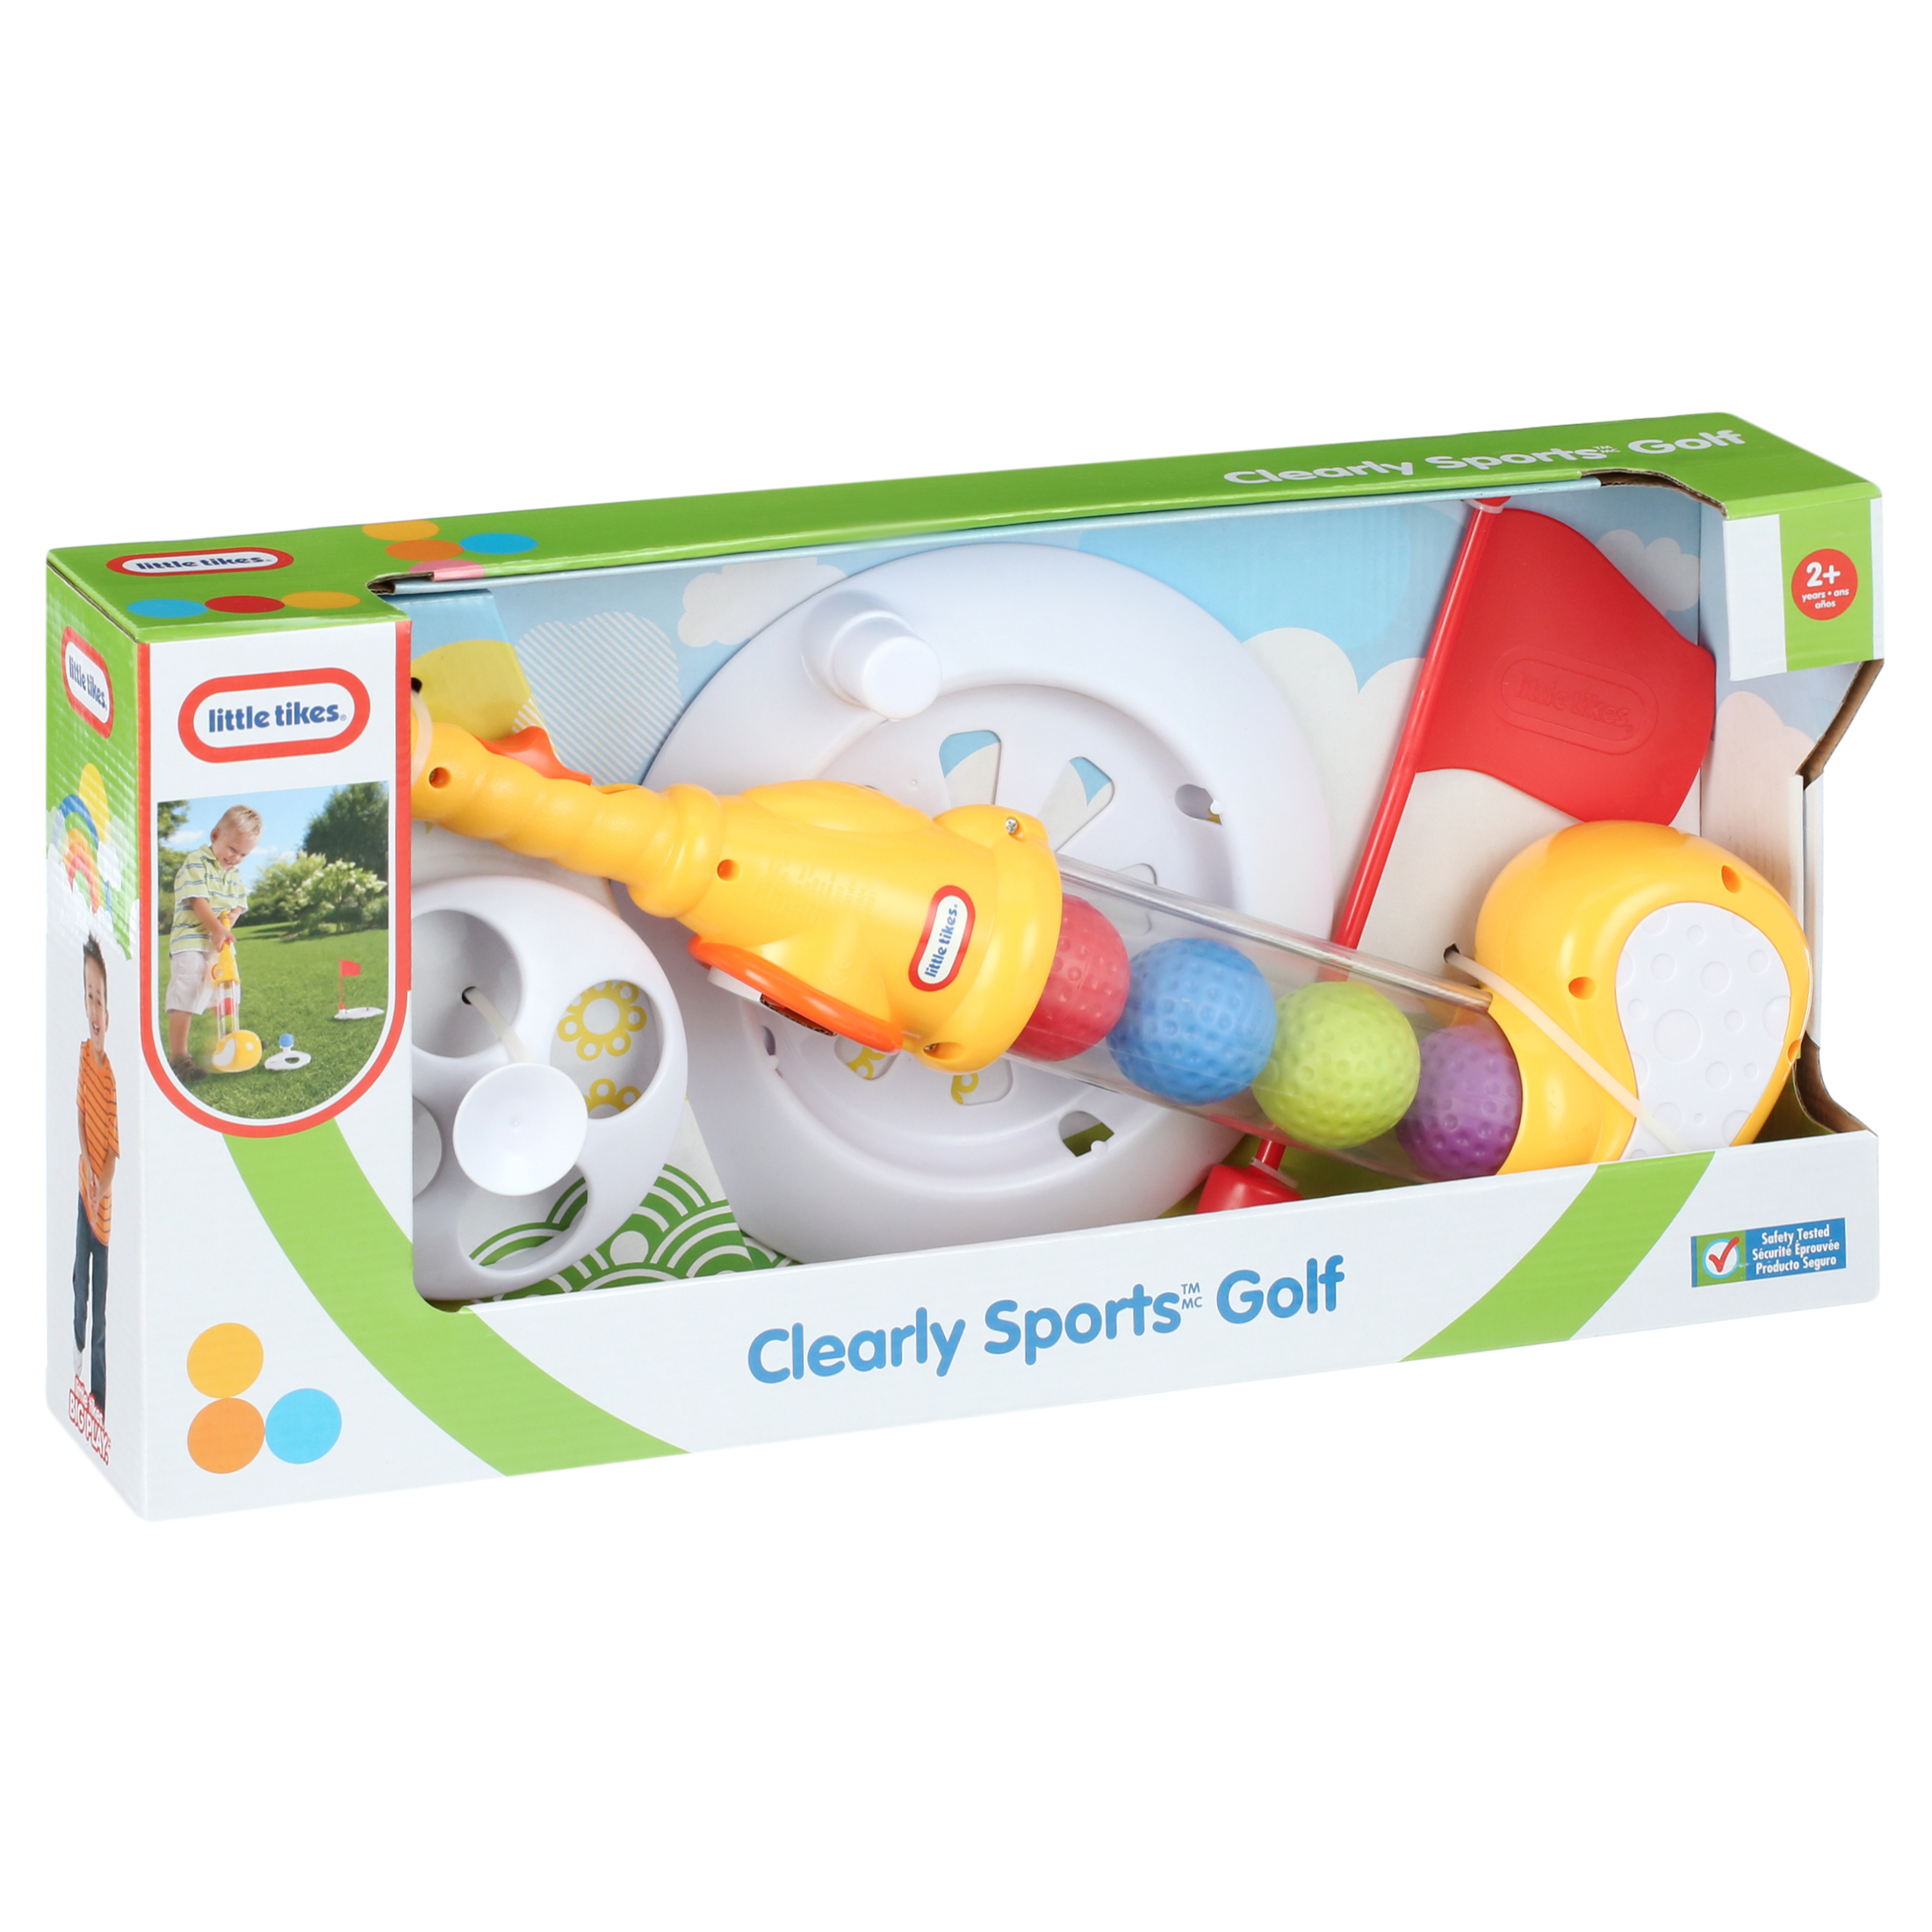 Little Tikes TotSports Clearly Golf Play Set - image 1 of 11